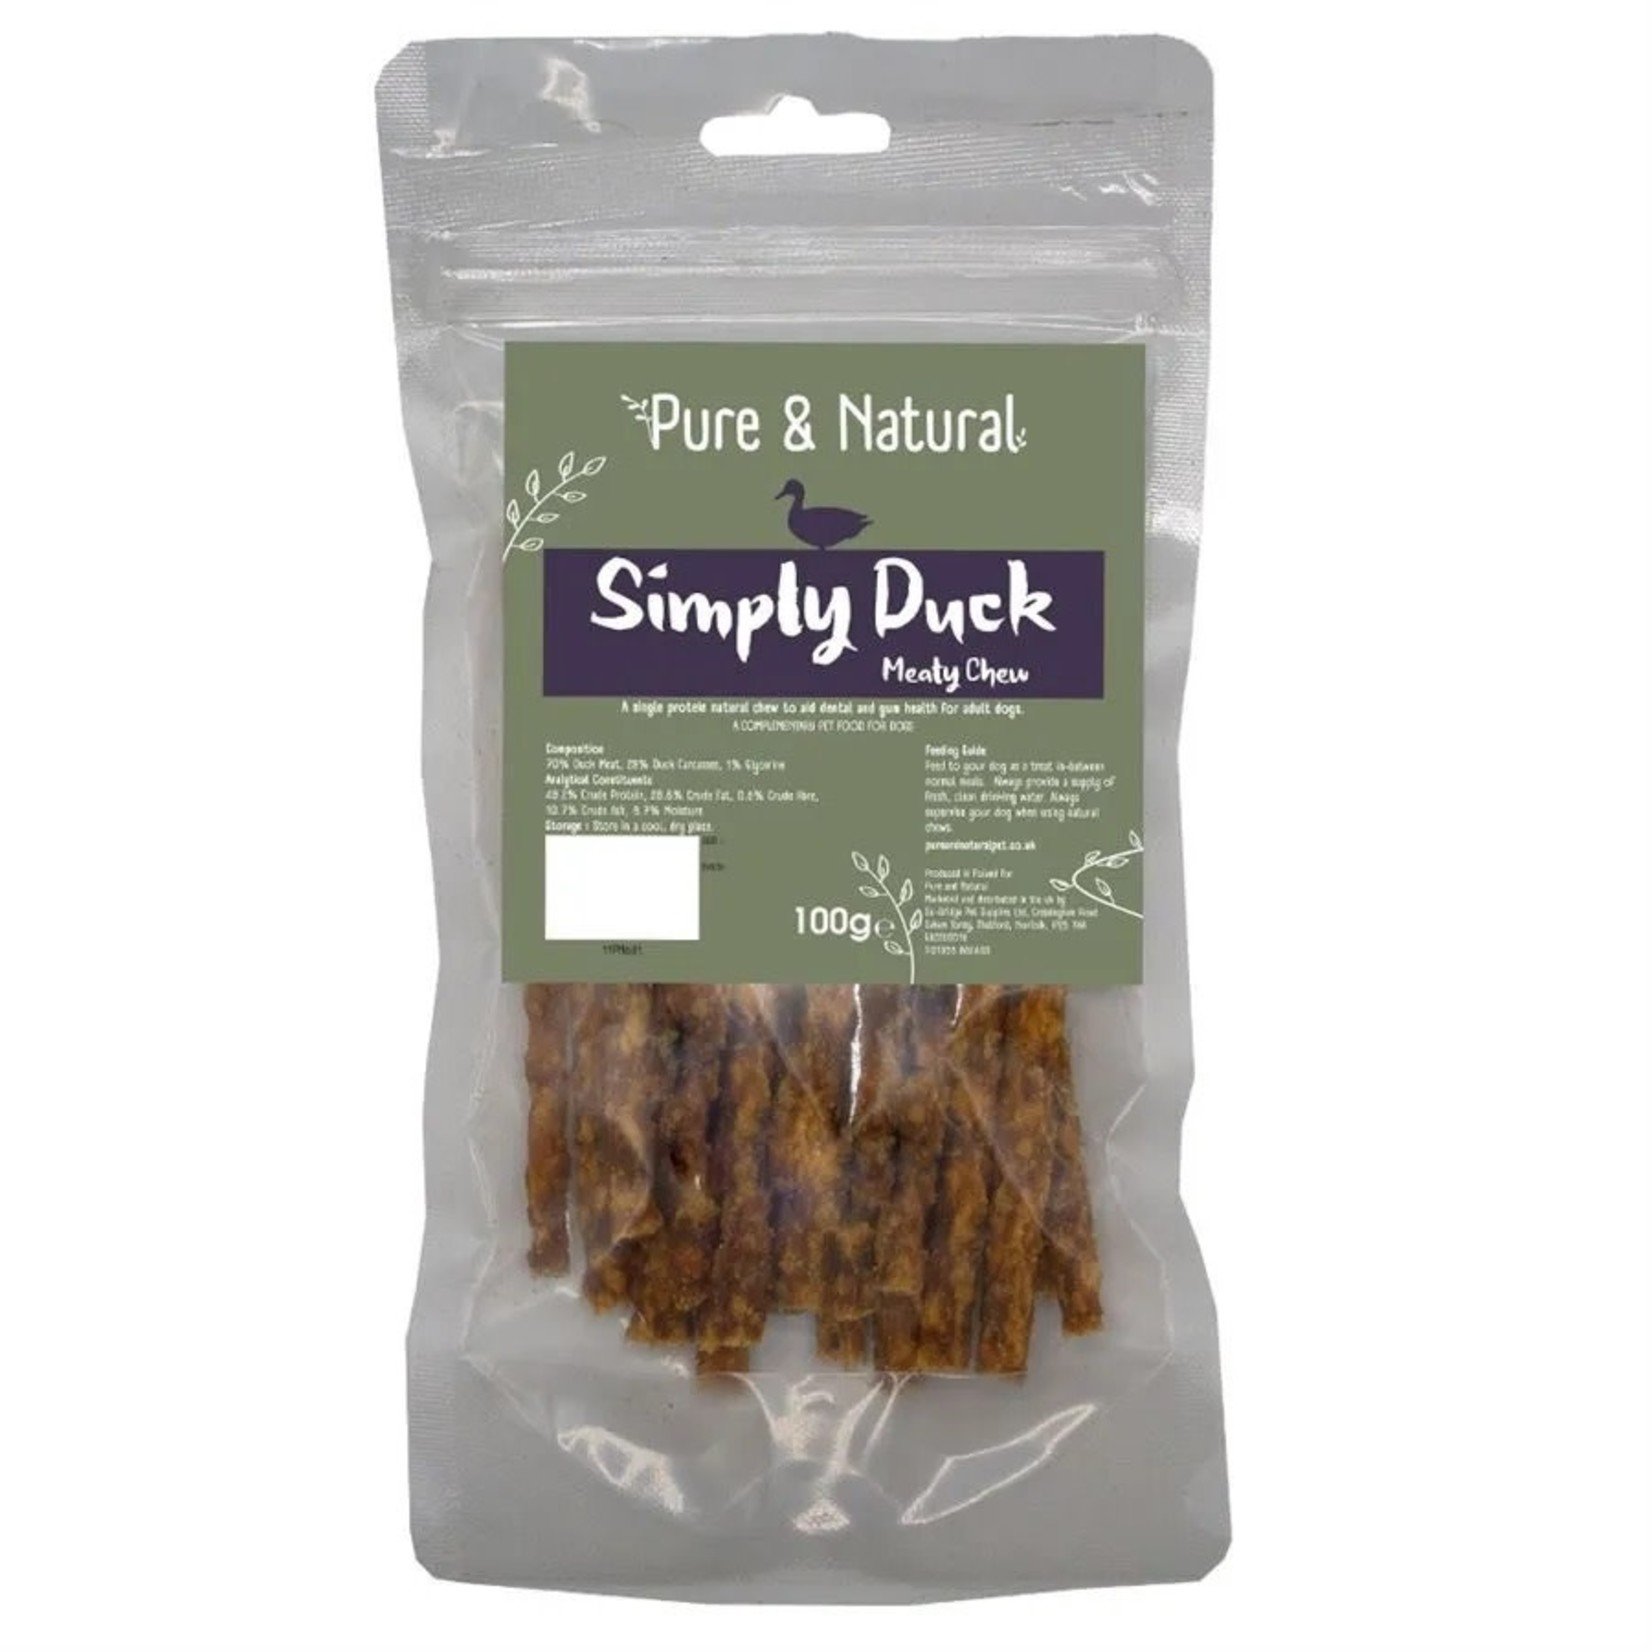 Pure & Natural Meat Sticks Dog Treats, Simply Duck 100g